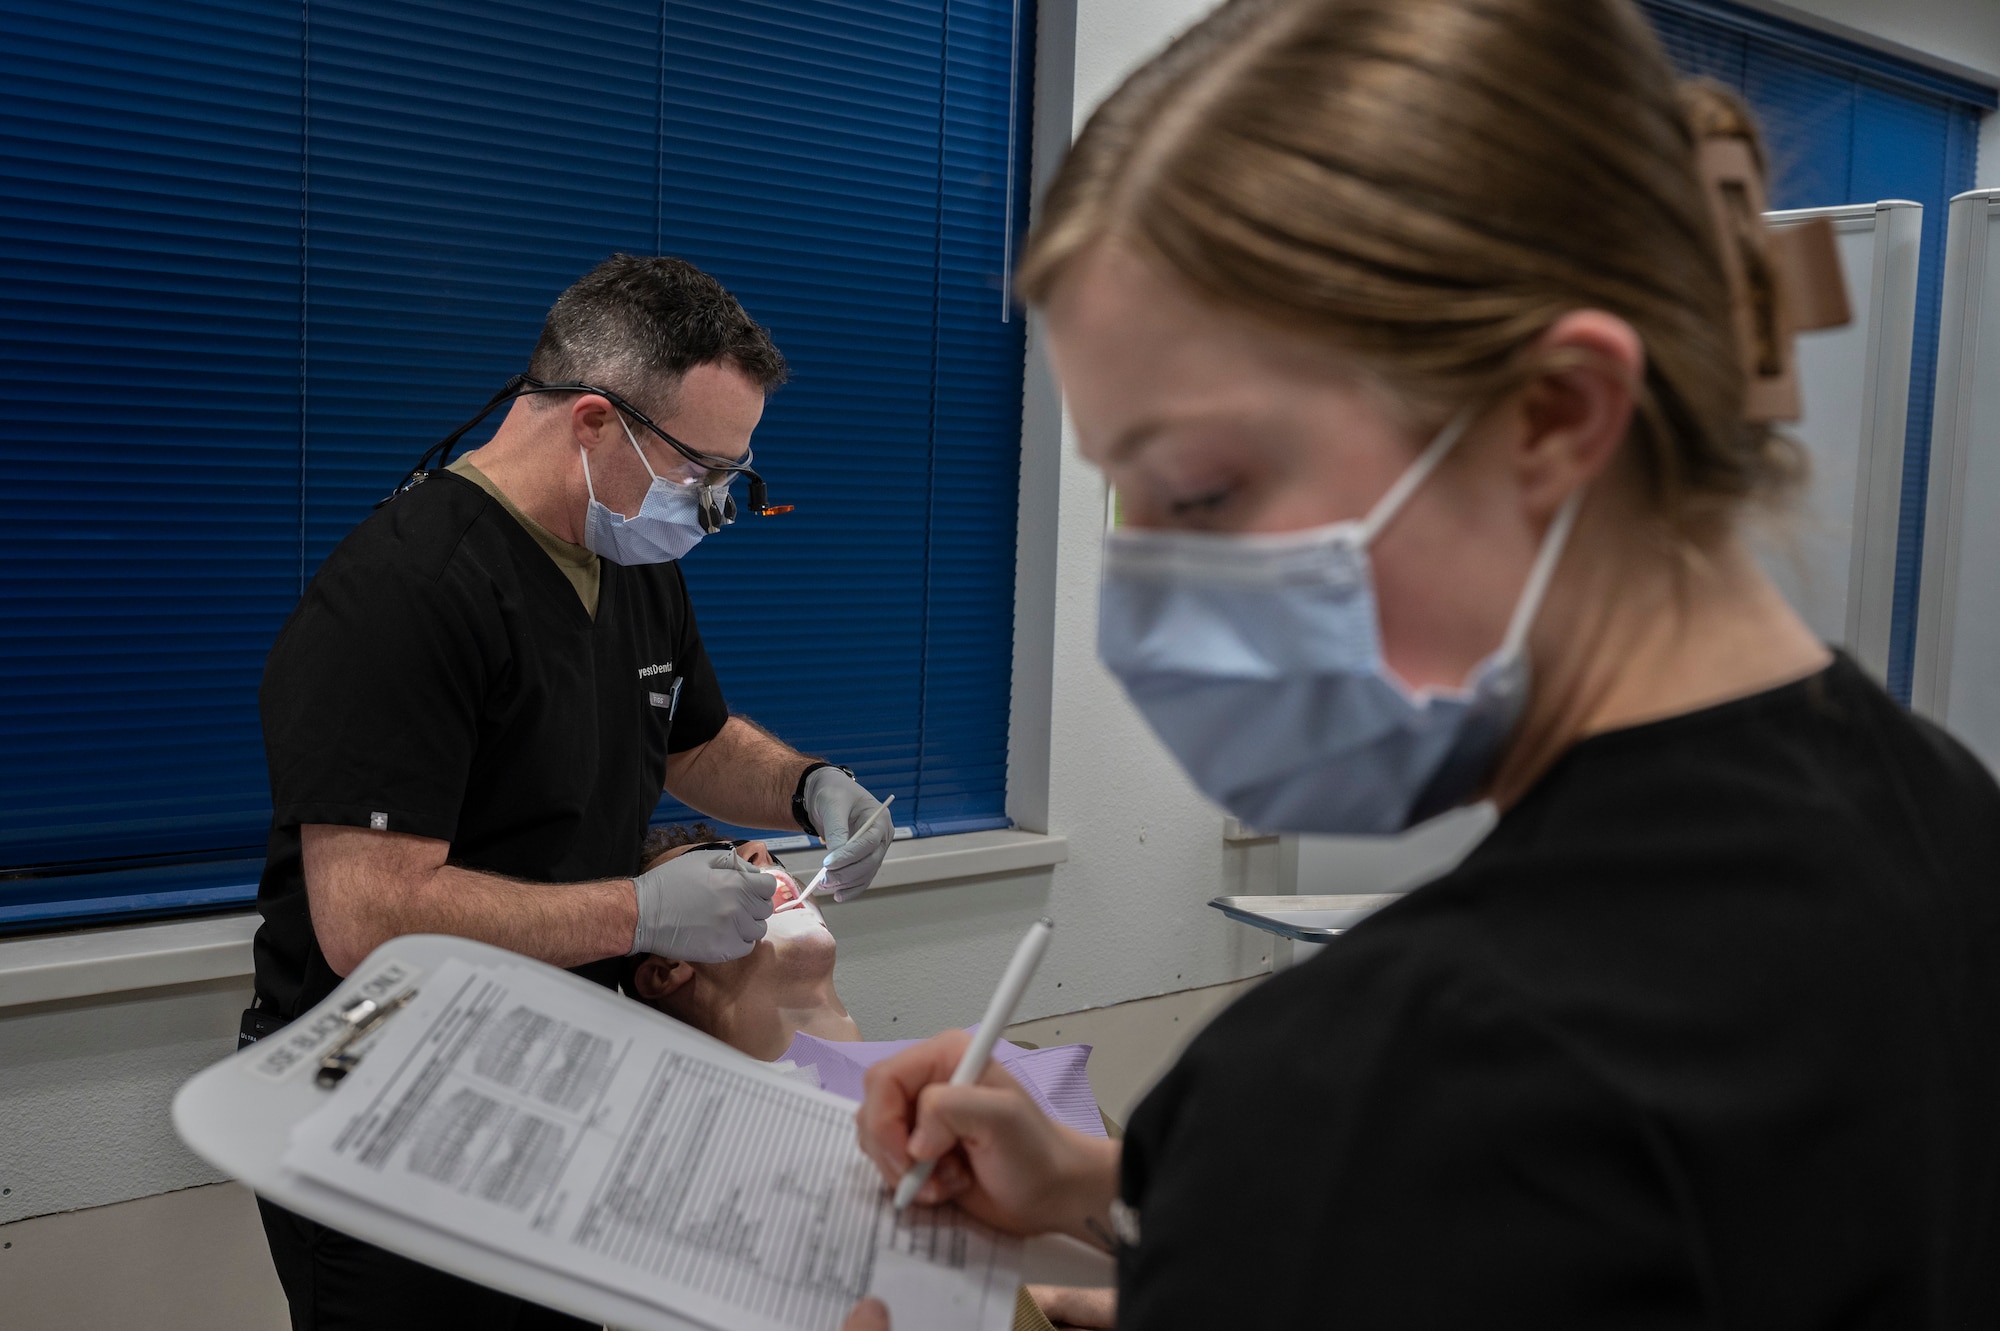 U.S. Air Force Capt. Gabriel Duffy, 7th Operations Medical Readiness Squadron dental flight dentist, and Senior Airman Kyra Hensen, 7th OMRS dental flight dental assistant, perform a dental exam on Airman 1st Class Kyle Vandergriff, 317th Aircraft Maintenance electrical and environmental technician, in the Mobile Dental Clinic at Dyess Air Force Base, Texas, Nov. 30, 2023. This new Mobile Dental Clinic capability allows patients to cut down on the amount of time spent away from their duty sections for dental exams as well as operating in an environment and time that works best for the patient. (U.S. Air Force photo by Airman 1st Class Alondra Cristobal Hernandez)